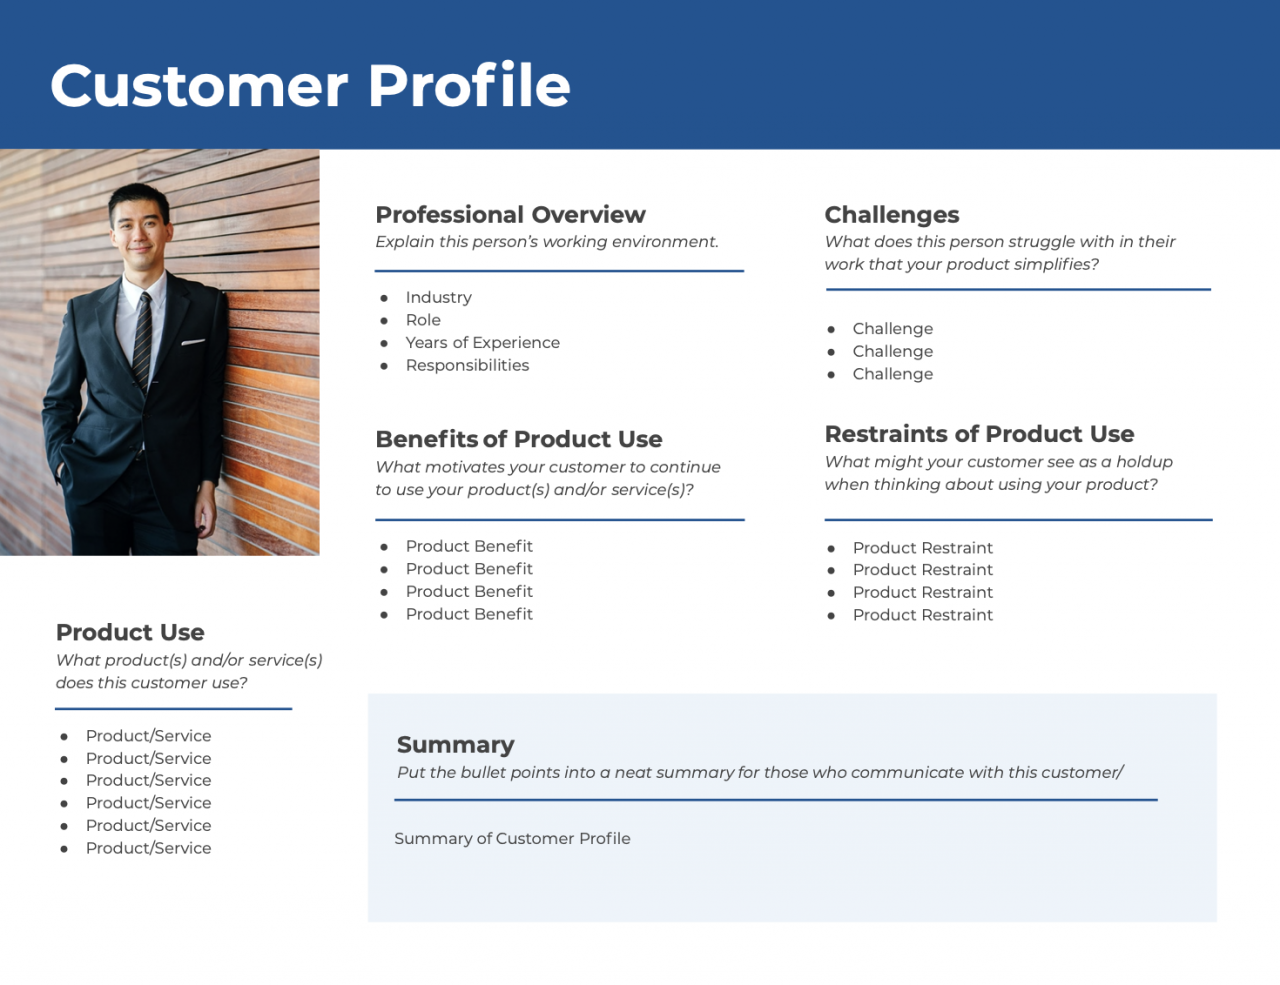 An example of a business profile